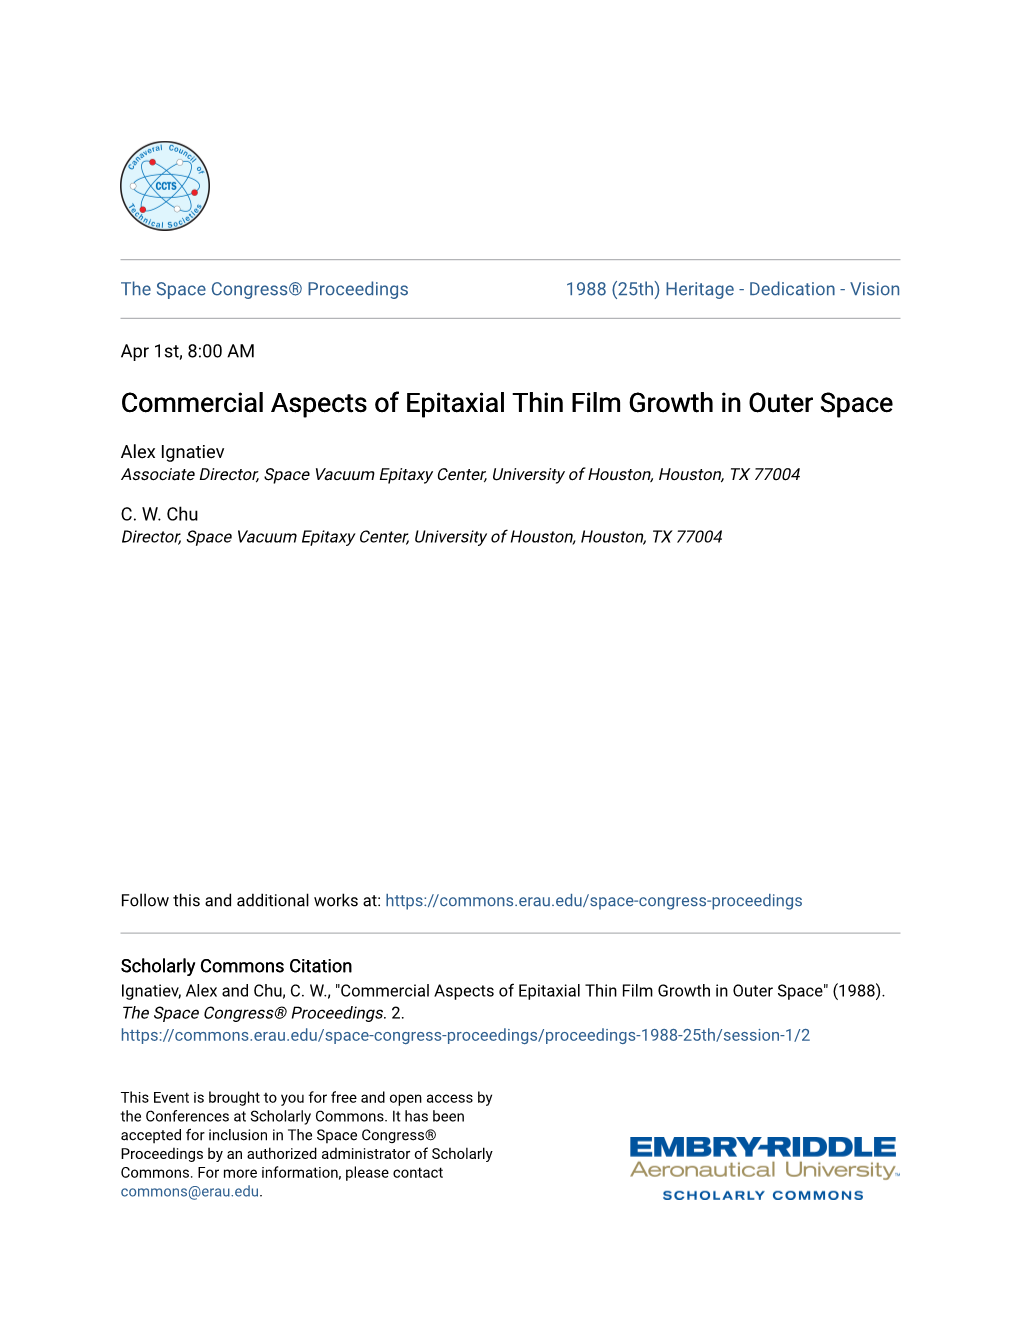 Commercial Aspects of Epitaxial Thin Film Growth in Outer Space